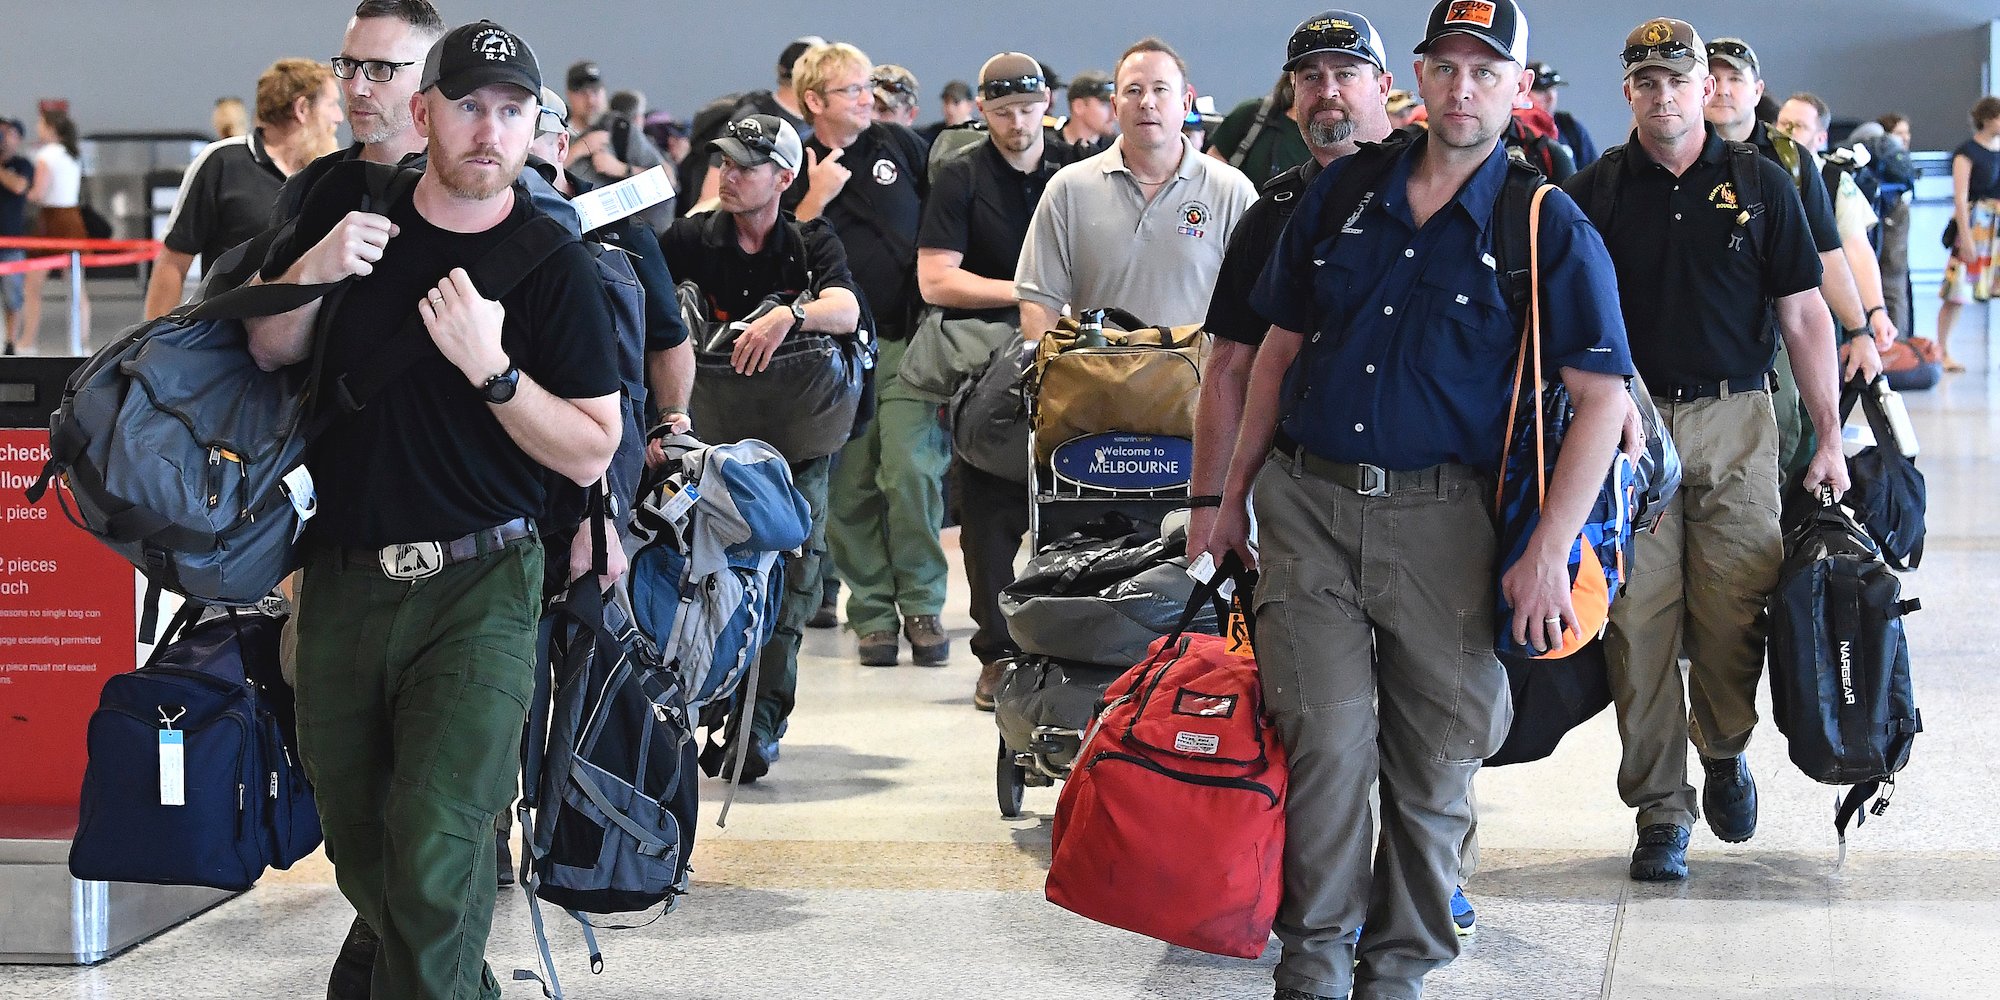 us_firefighters_arrive_in_australia_to_help_fight_against_bushfires